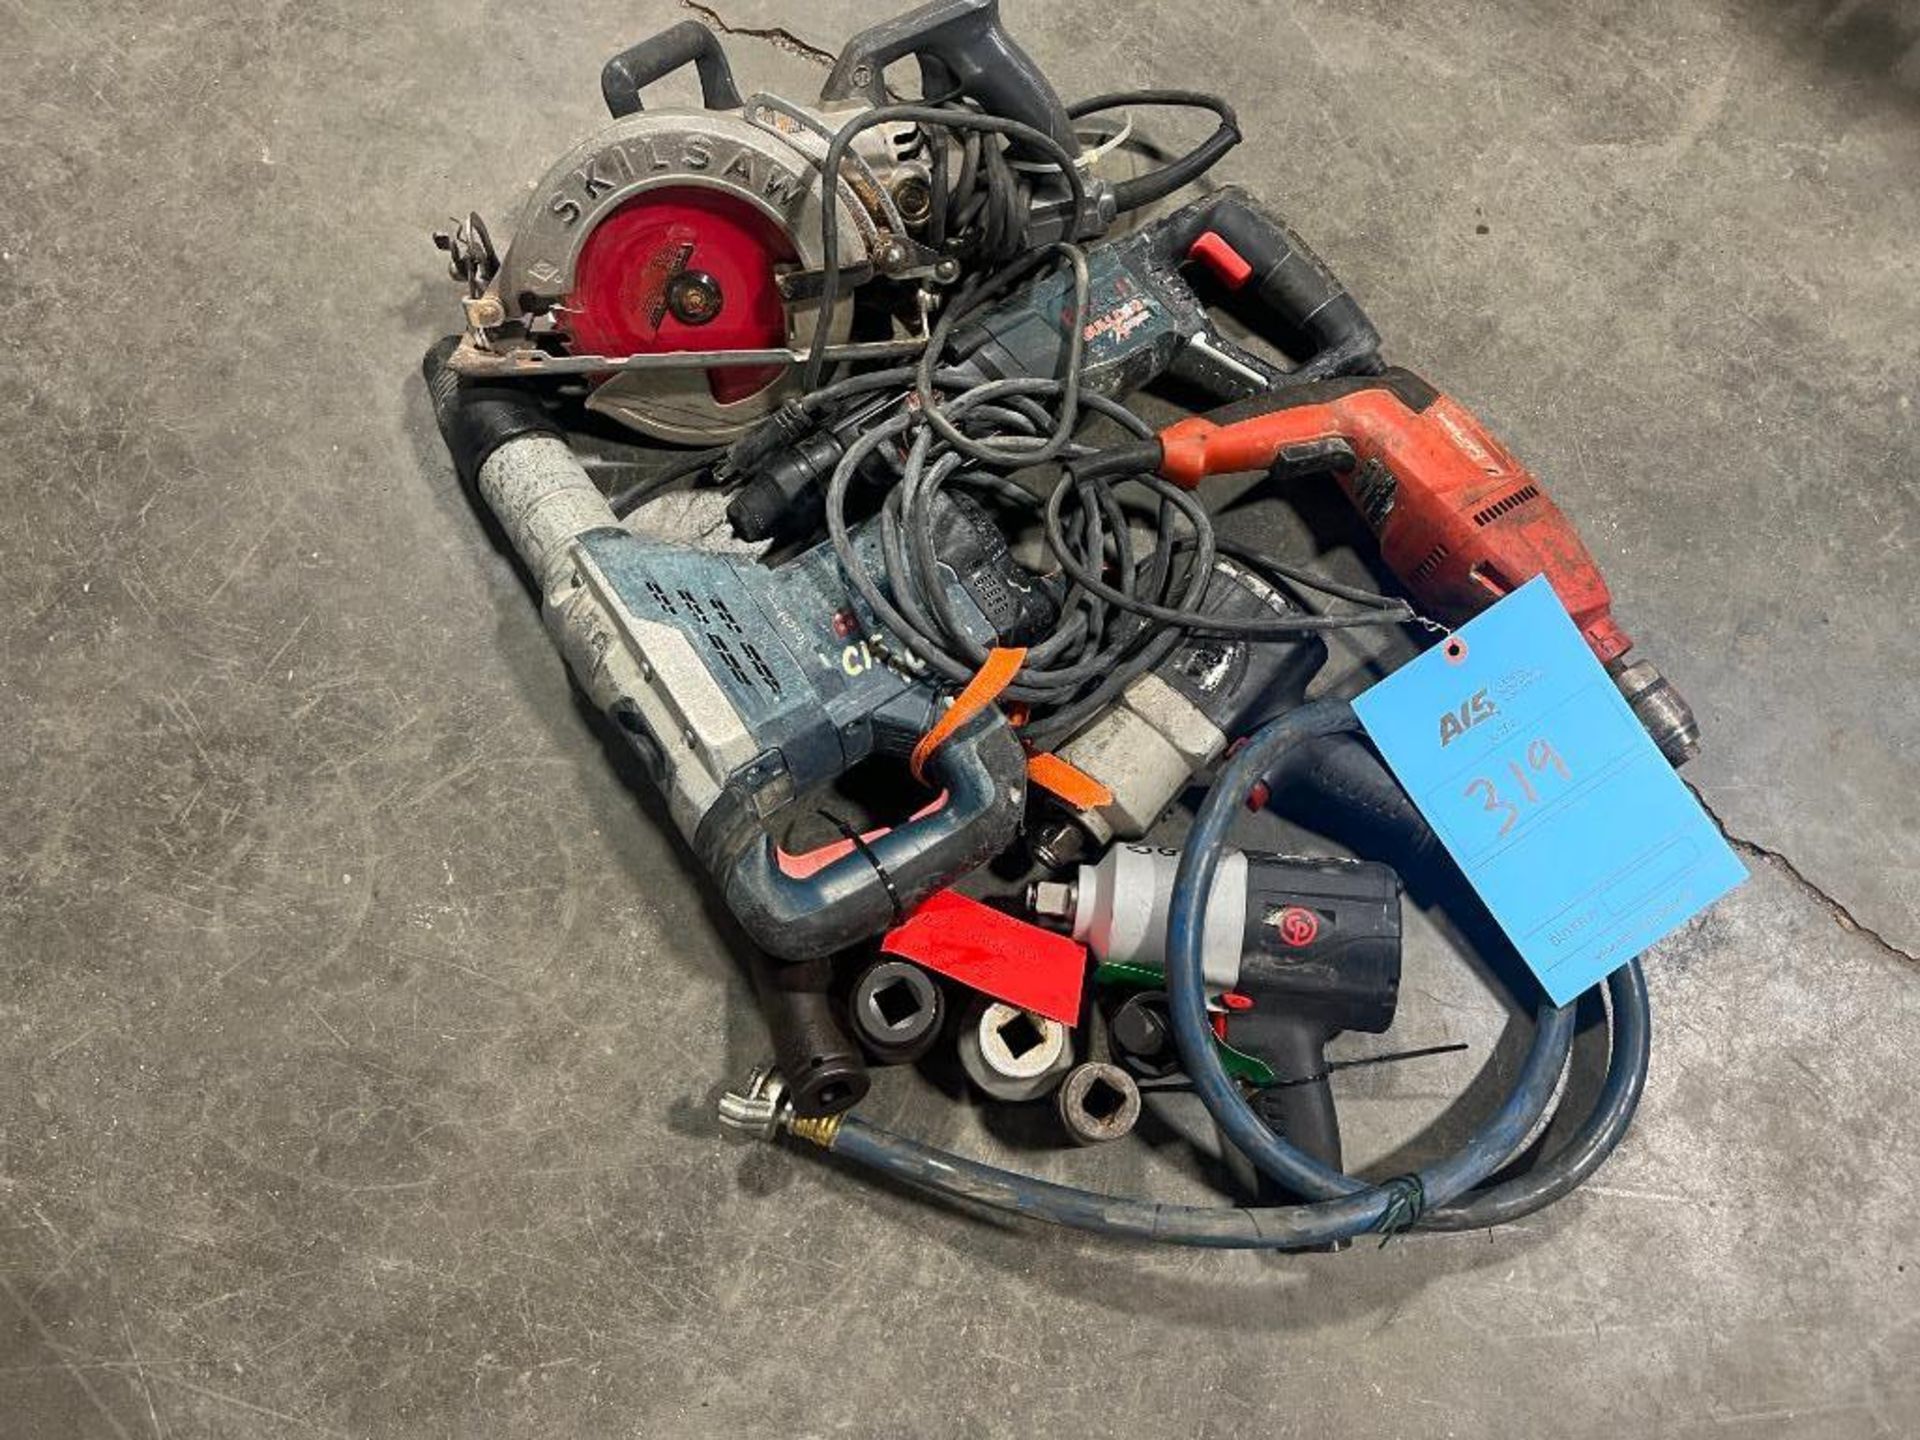 Assorted Power Tools (1 Need Repair *Note Red Tag*)